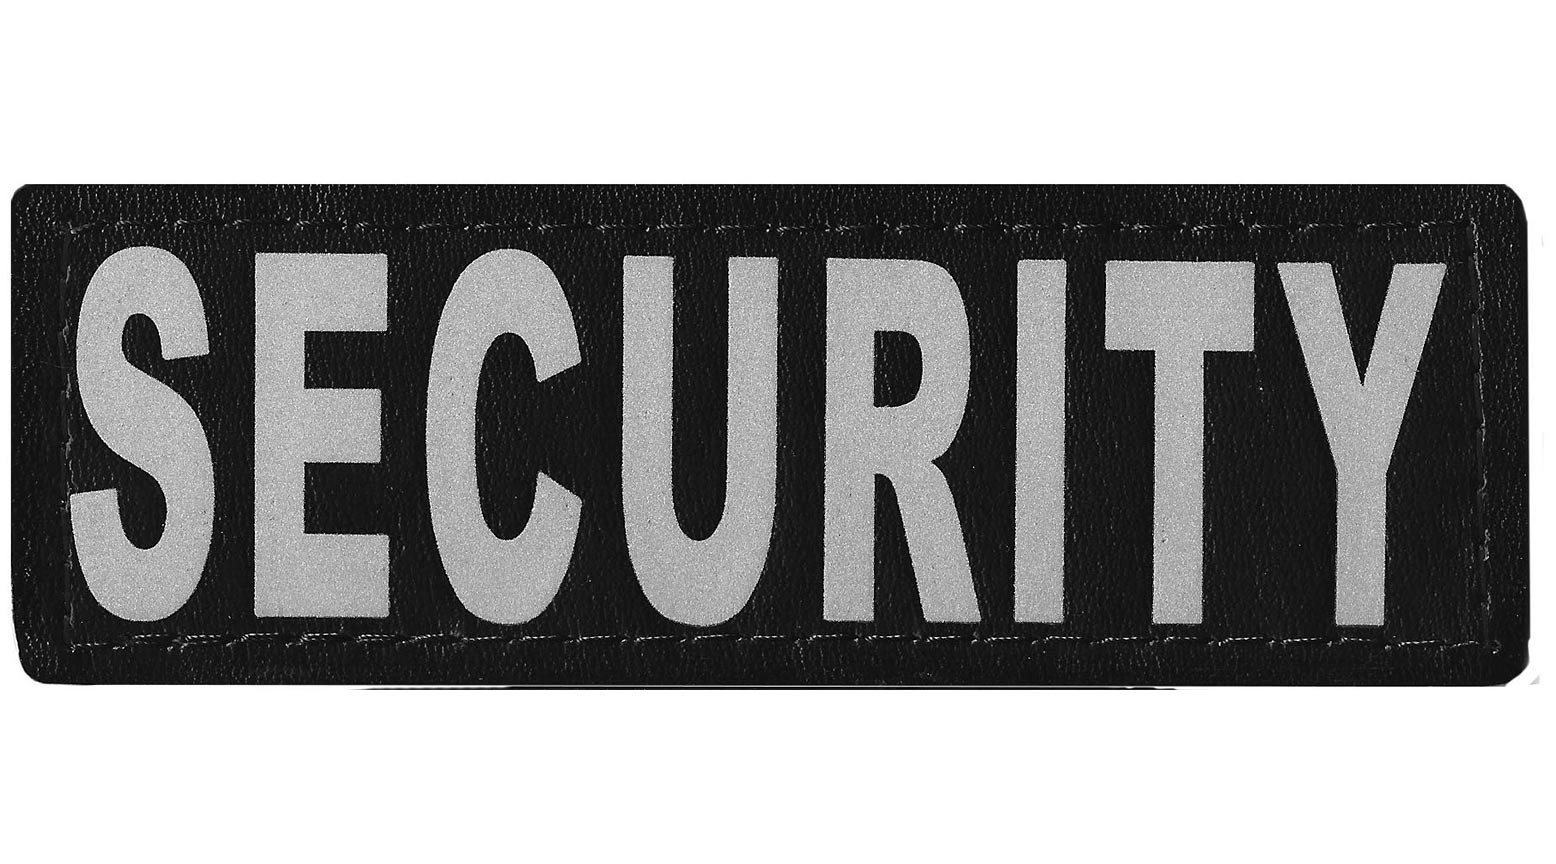 Physical Security for Events / Actions